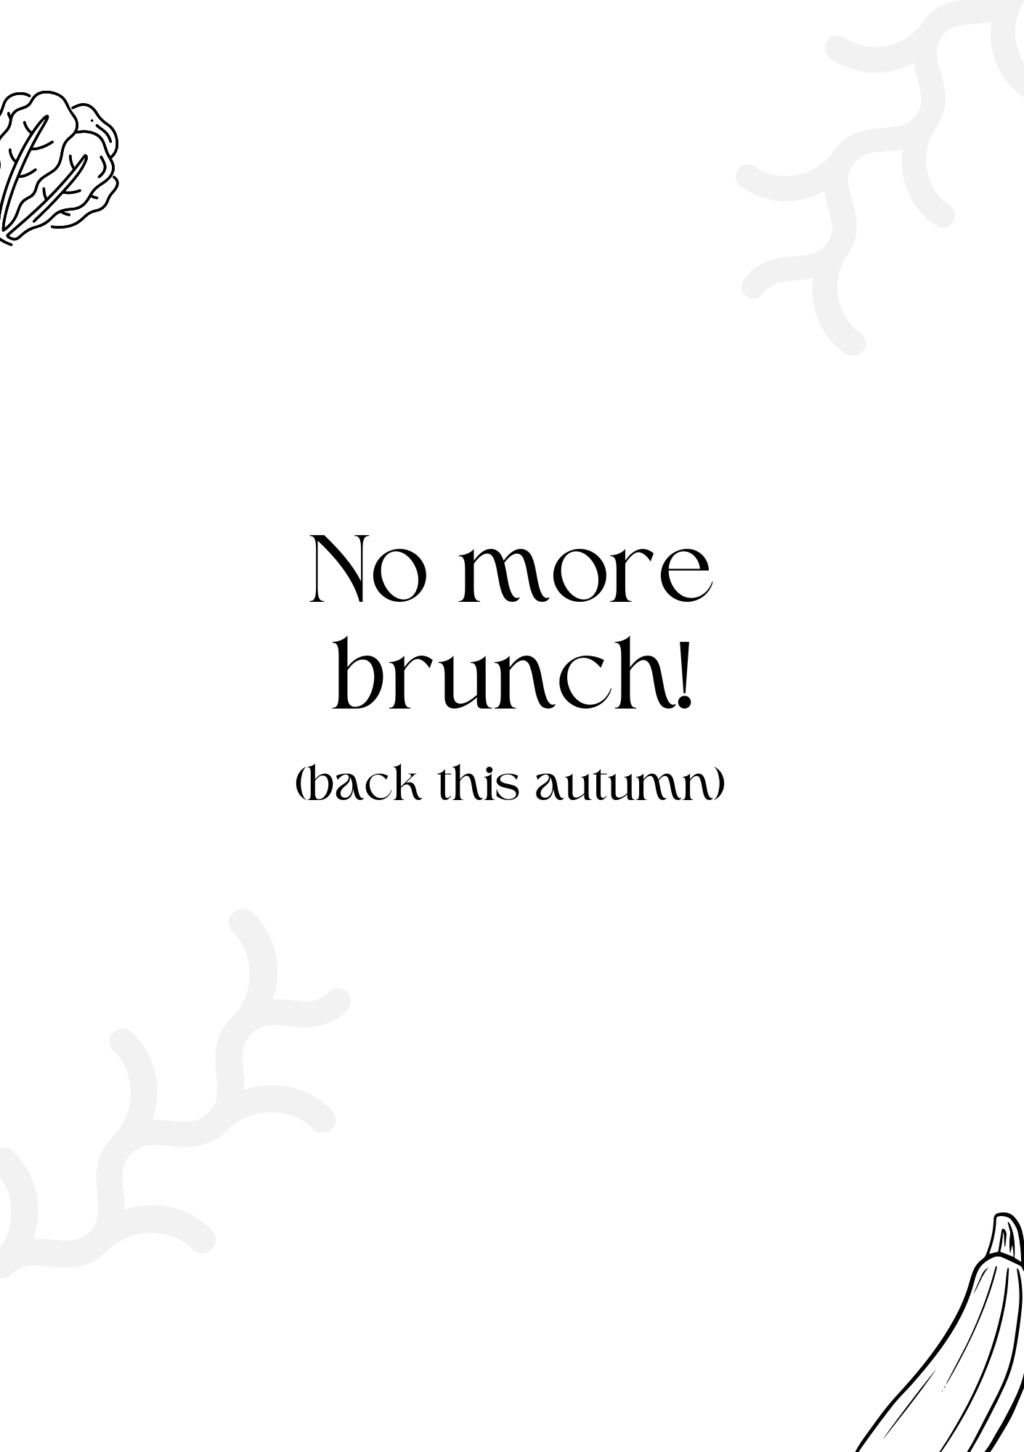 The brunch